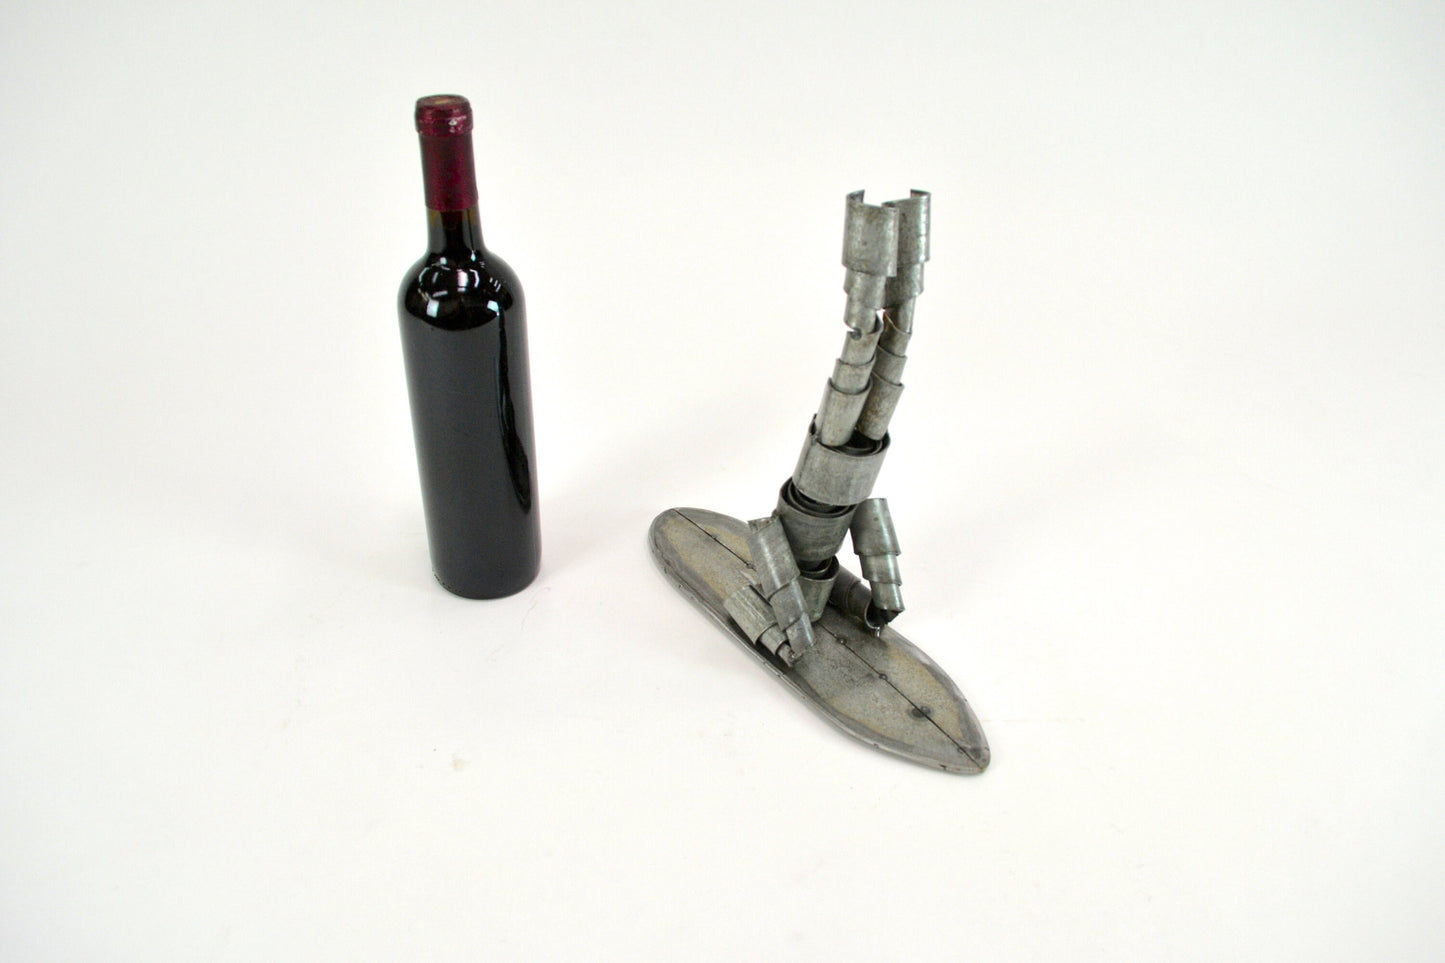 Paddle board Wine Barrel Ring Wine Bot - Tandha - Made from retired CA wine barrel rings. 100% Recycled!